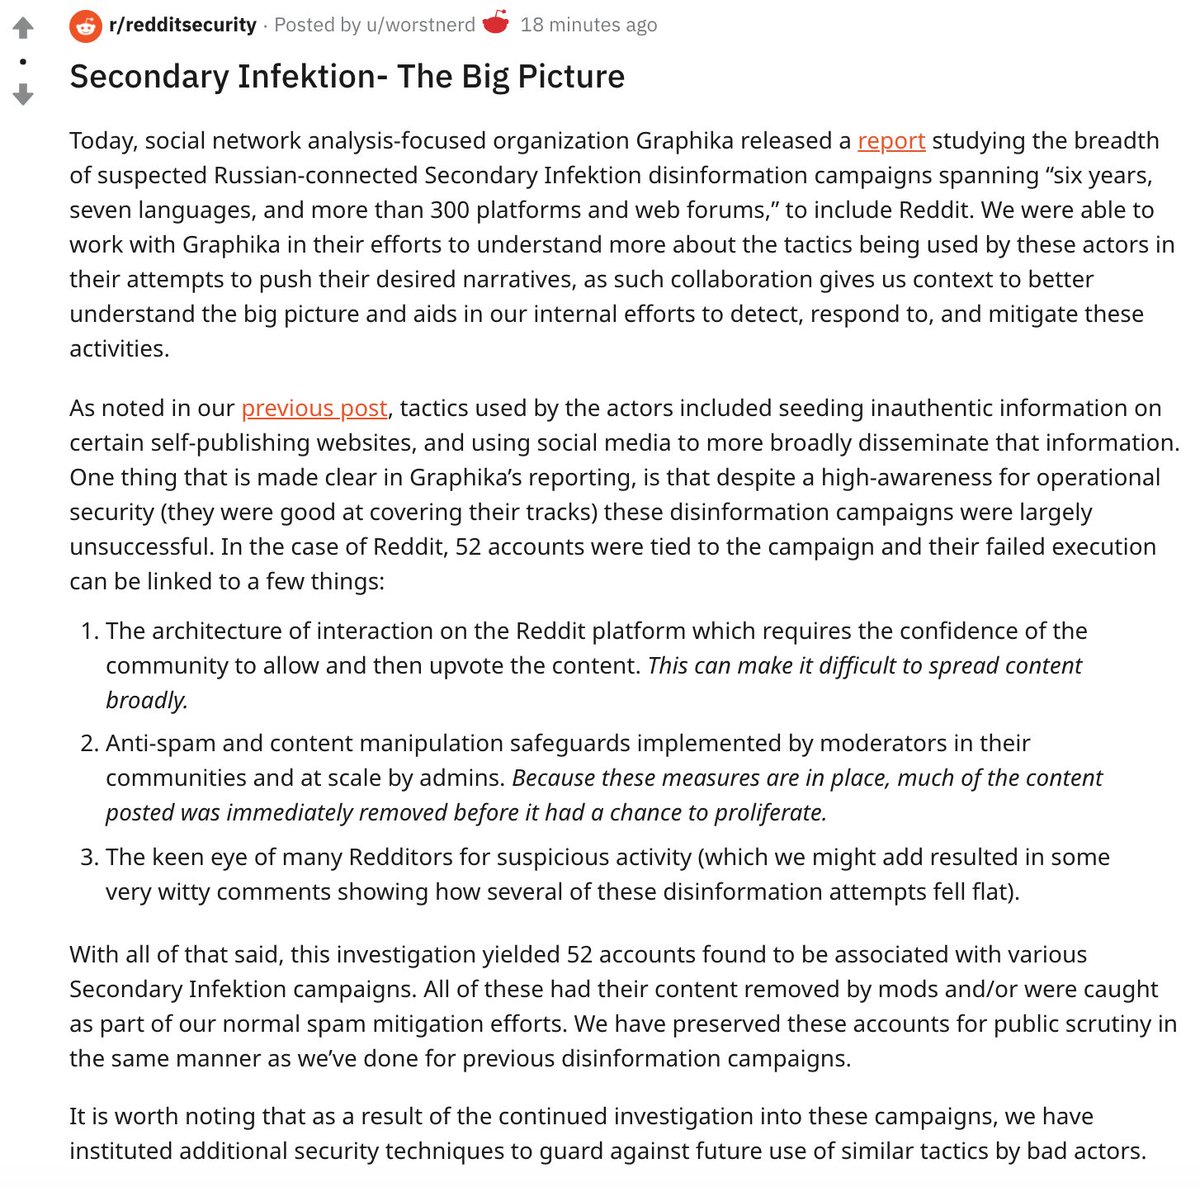  And now up, a statement from the  @reddit security team about our joint work on Secondary Infektion. Love the statement's name: "Secondary Infektion- The Big Picture". https://reddit.com/r/redditsecurity/comments/ha885d/secondary_infektion_the_big_picture/